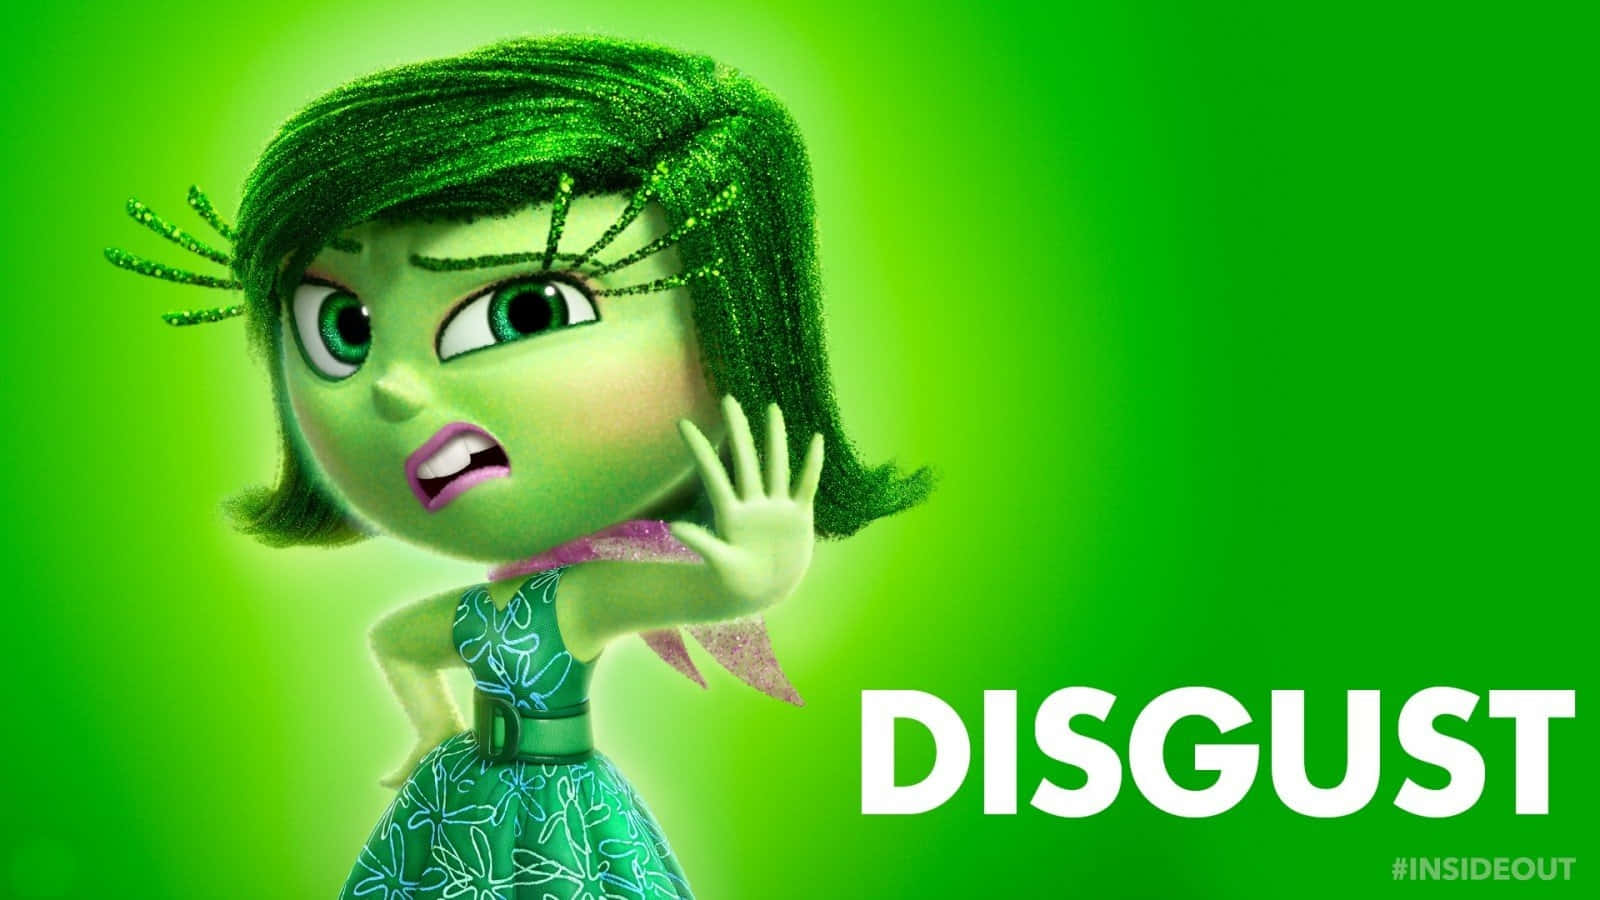 Follow the emotions of Joy, Sadness, Anger, Fear and Disgust in "Inside Out"